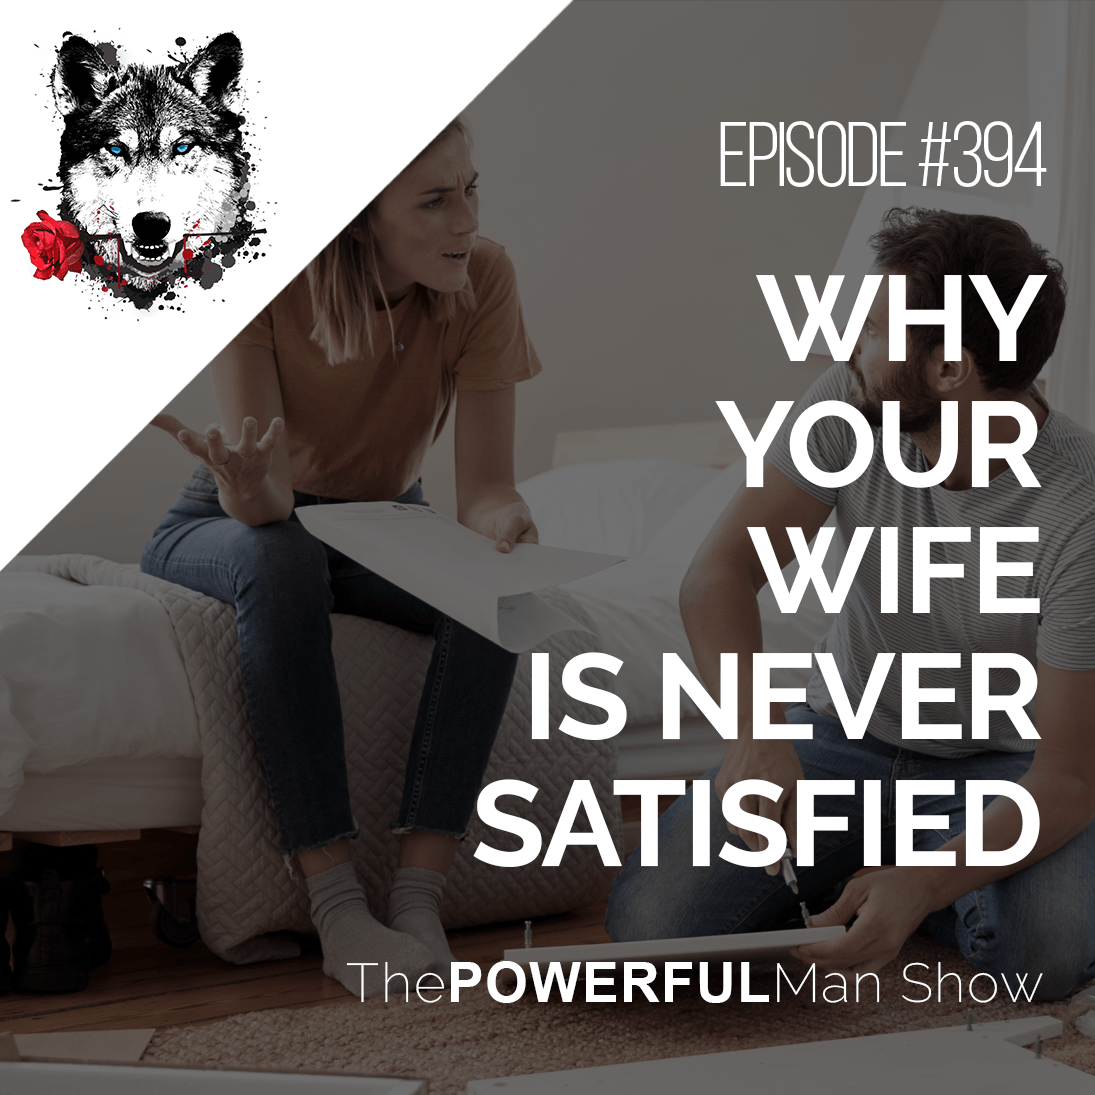 Why Your Wife Is Never Satisfied